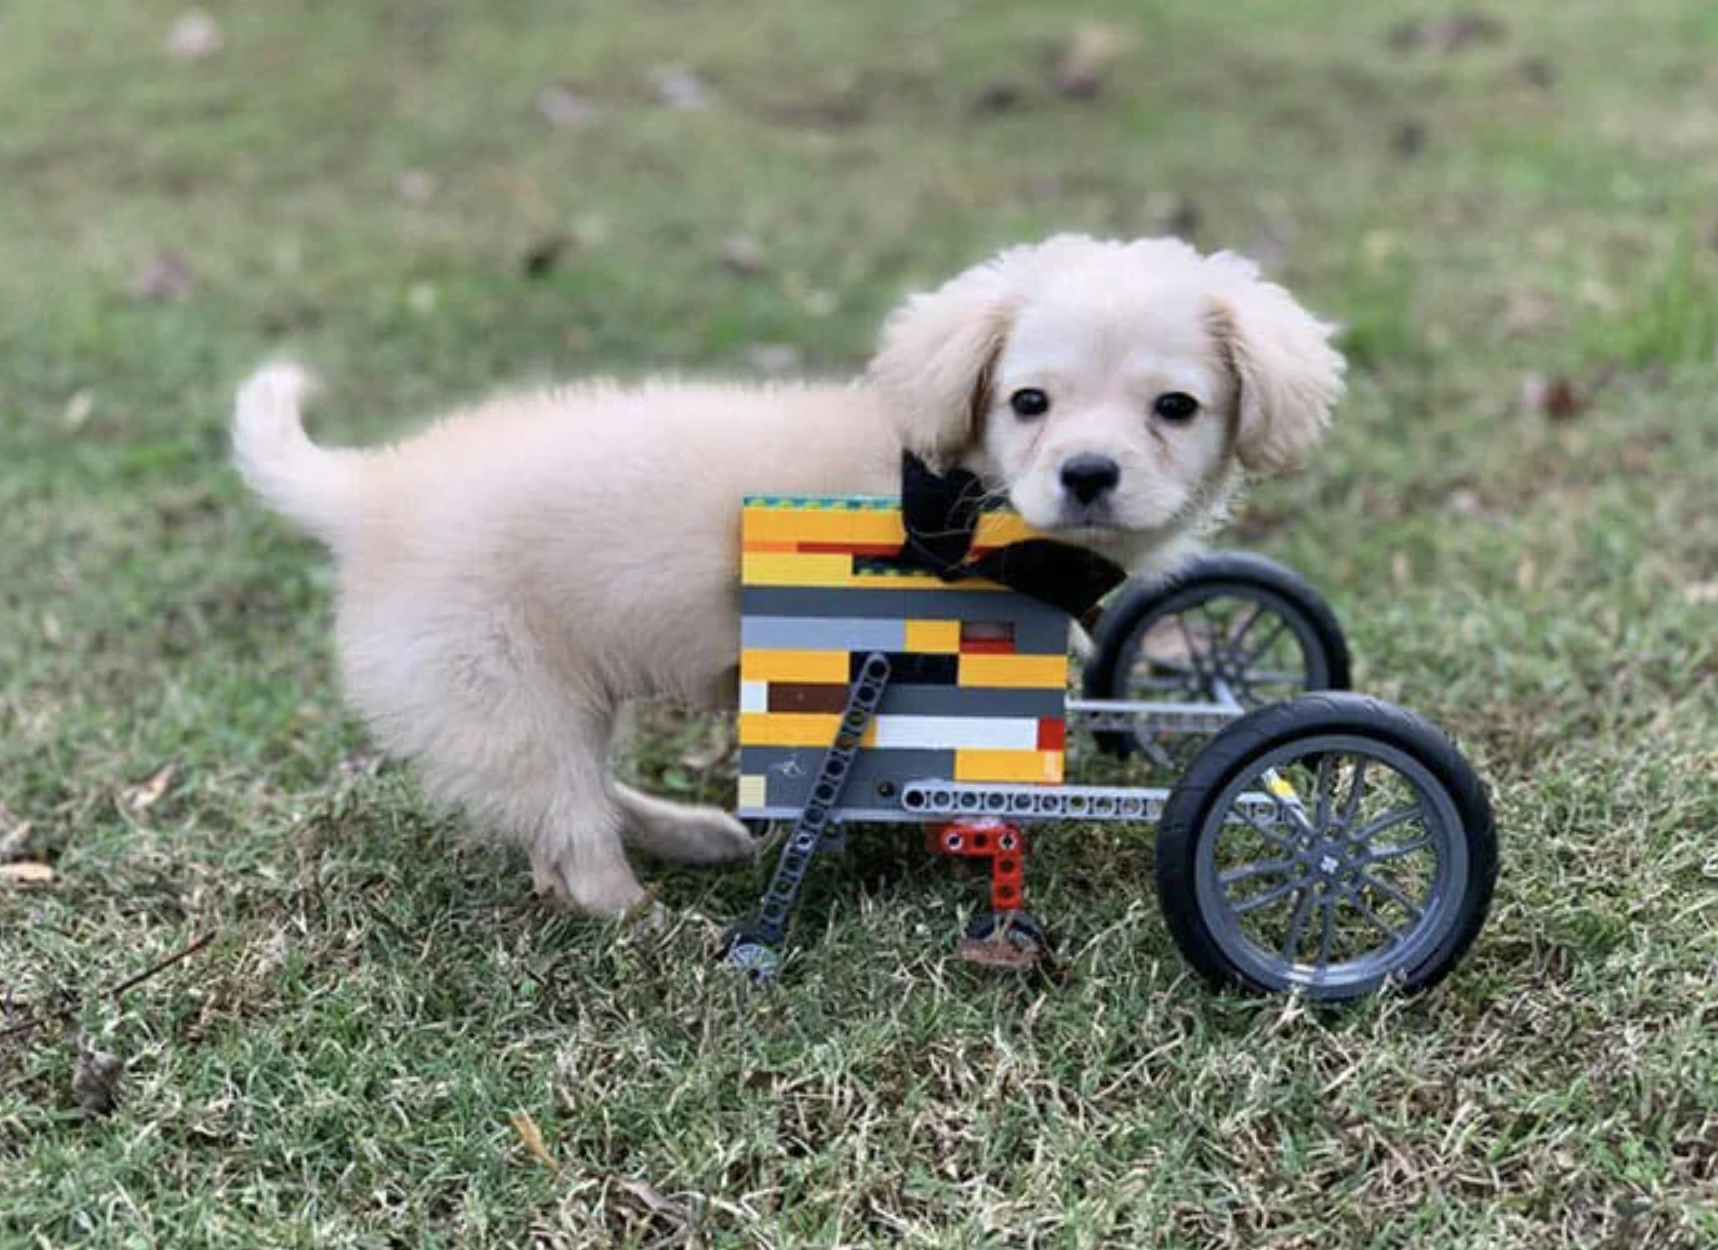 A 12-year-old kid builds a wheelchair from LEGO for an unwanted puppy so that it can enjoy life 5